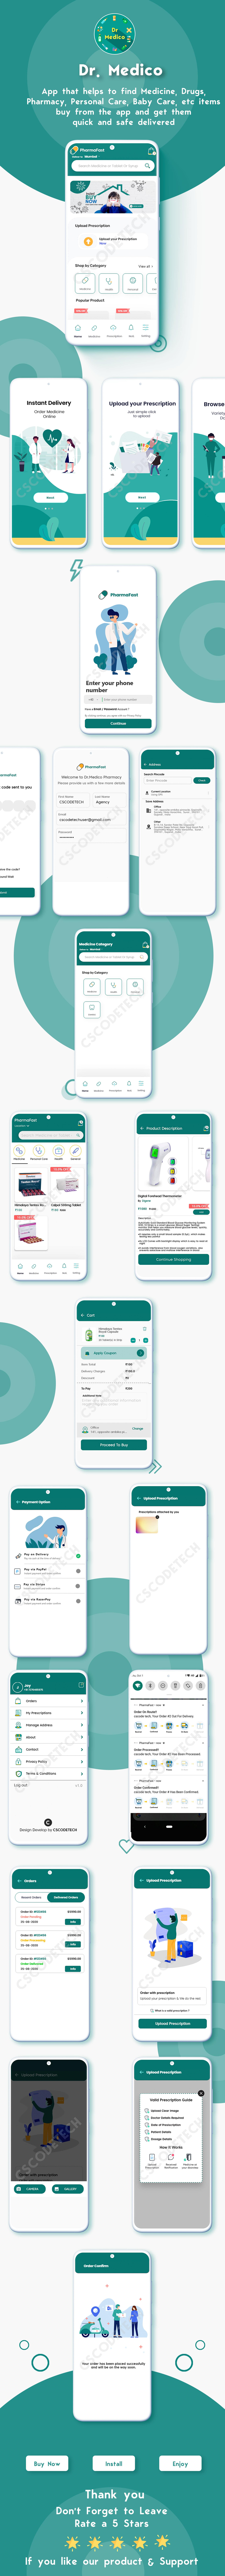 On Demand Pharmacy Delivery with Medicine Delivery and Upload Prescription App with 2 Apps & Admin - 7